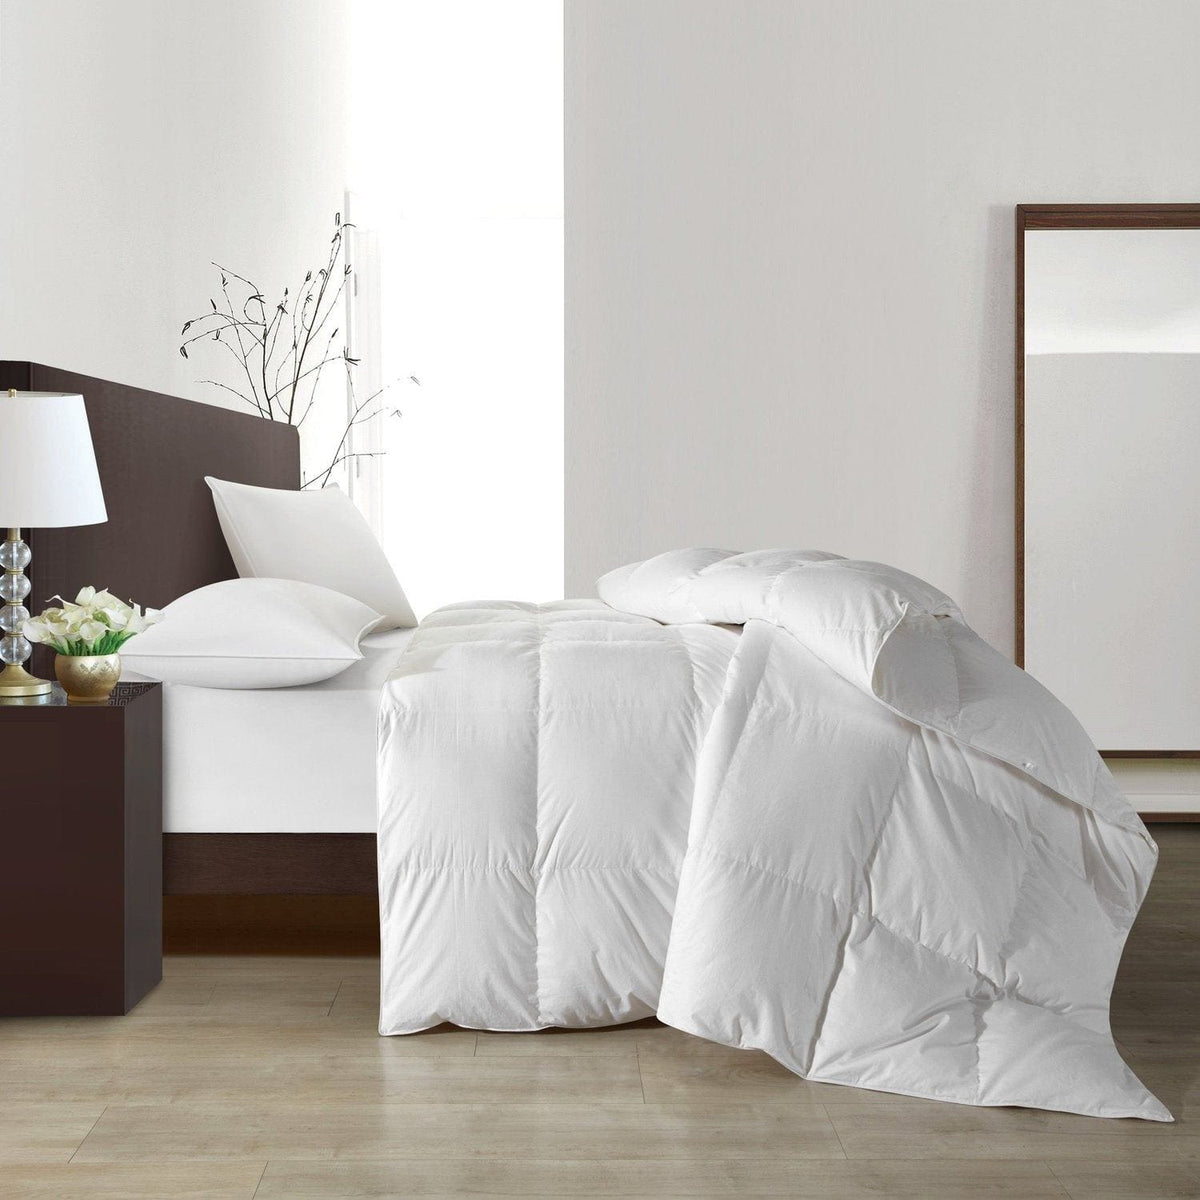 bed cover Archives - ALLORA Home & Living